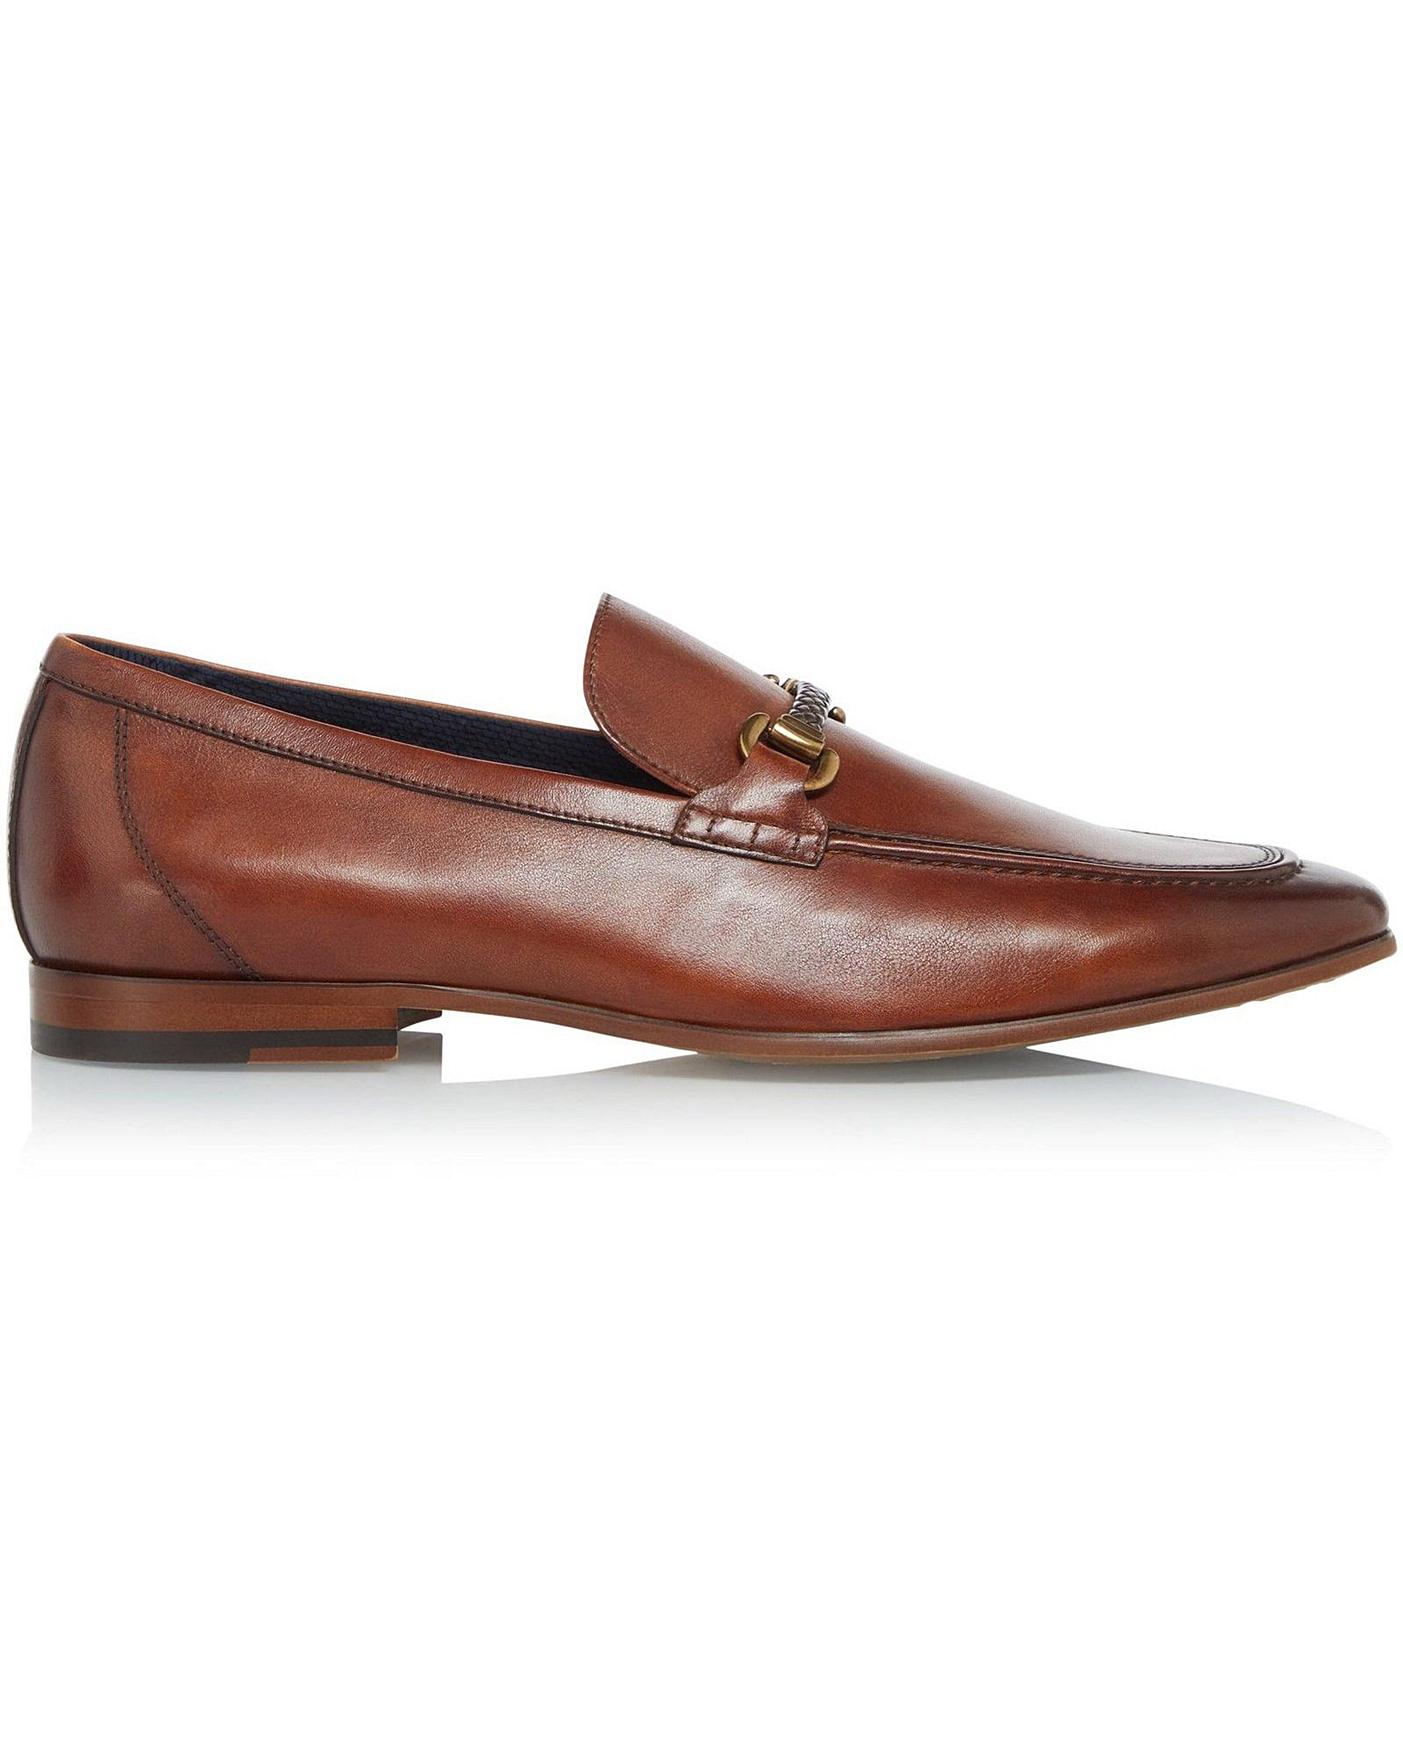 Santino Woven Trim Loafers